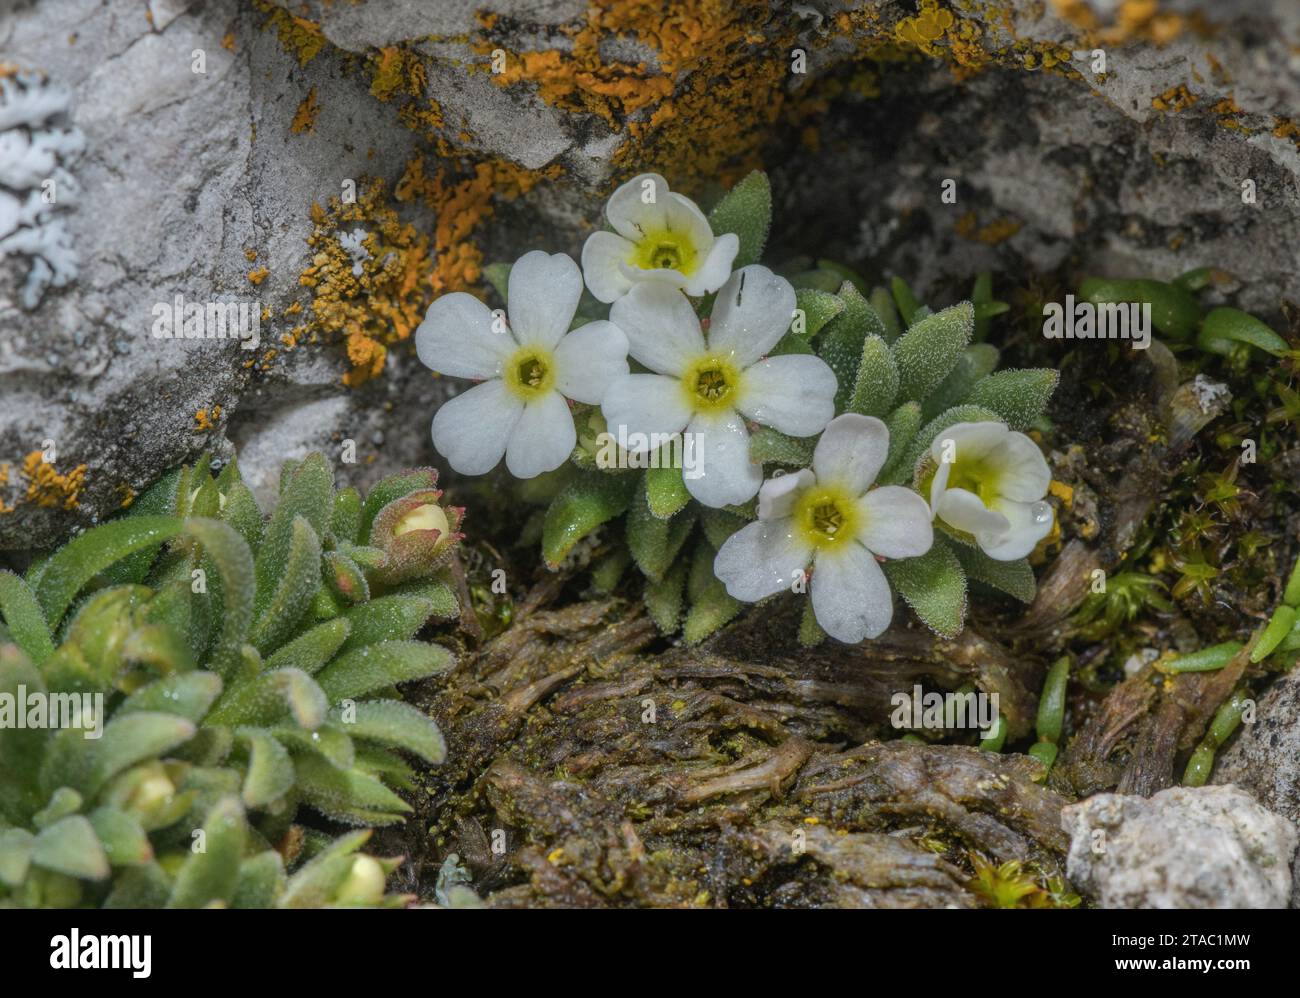 Hausmanns Rock Jasmine, Androsace hausmannii, in flower in dolomite rock-crevice, in the Dolomites. Stock Photo